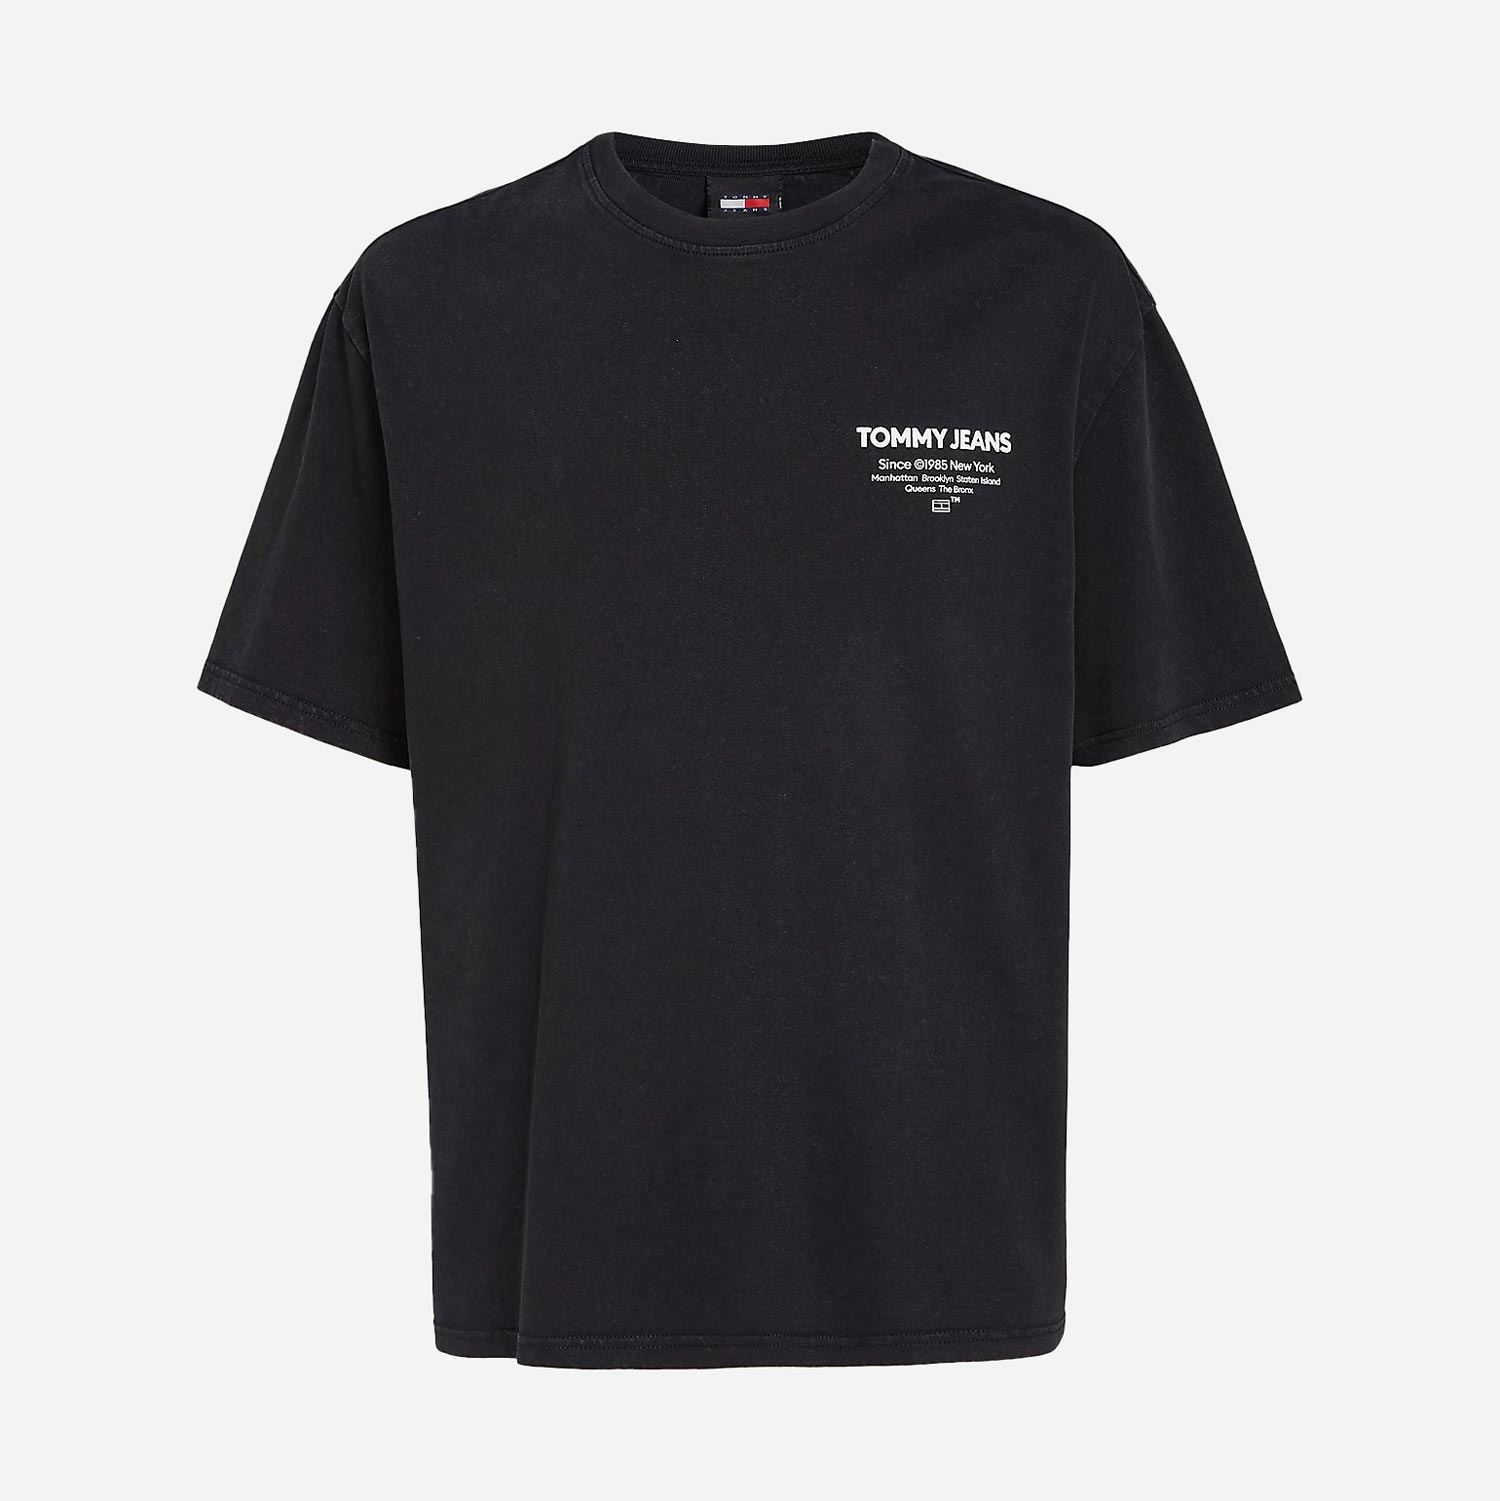 Tommy Jeans Washed Essential Regular Fit Short Sleeve Tee - Black